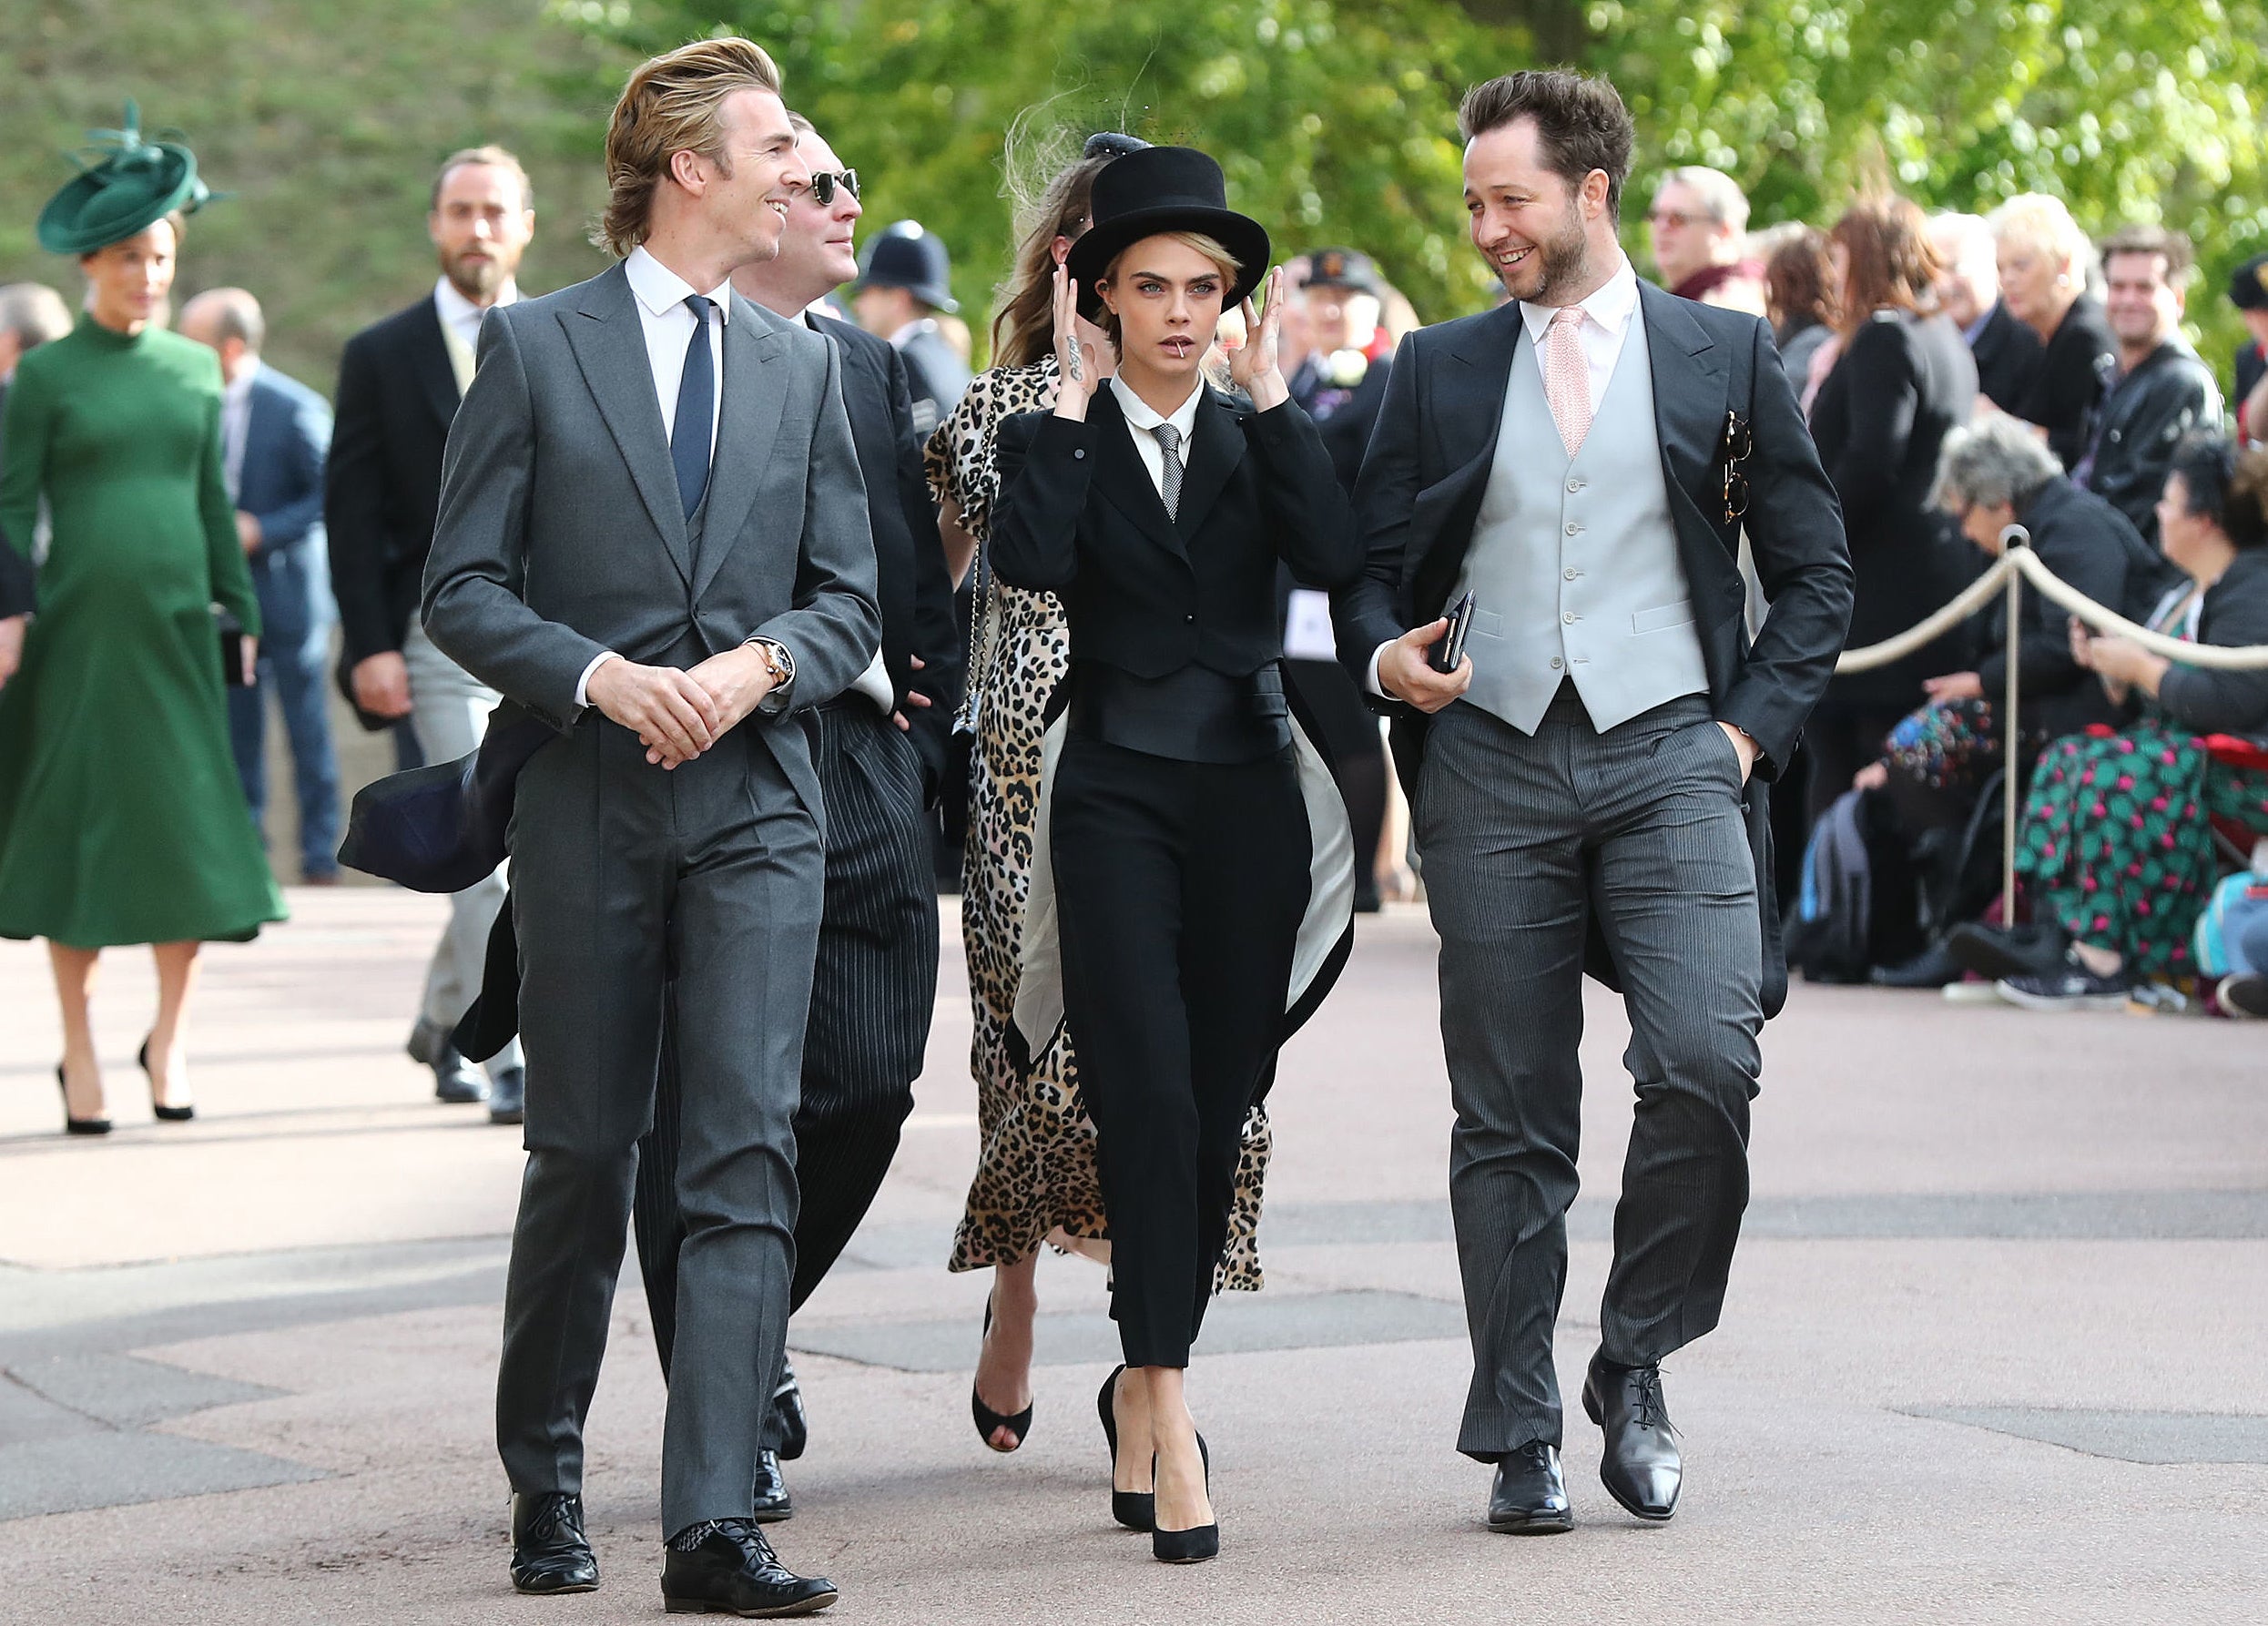 Cara Delevingne arrives at the royal wedding with her brother-in-law James Cook (left) and US journalist Derek Blasberg